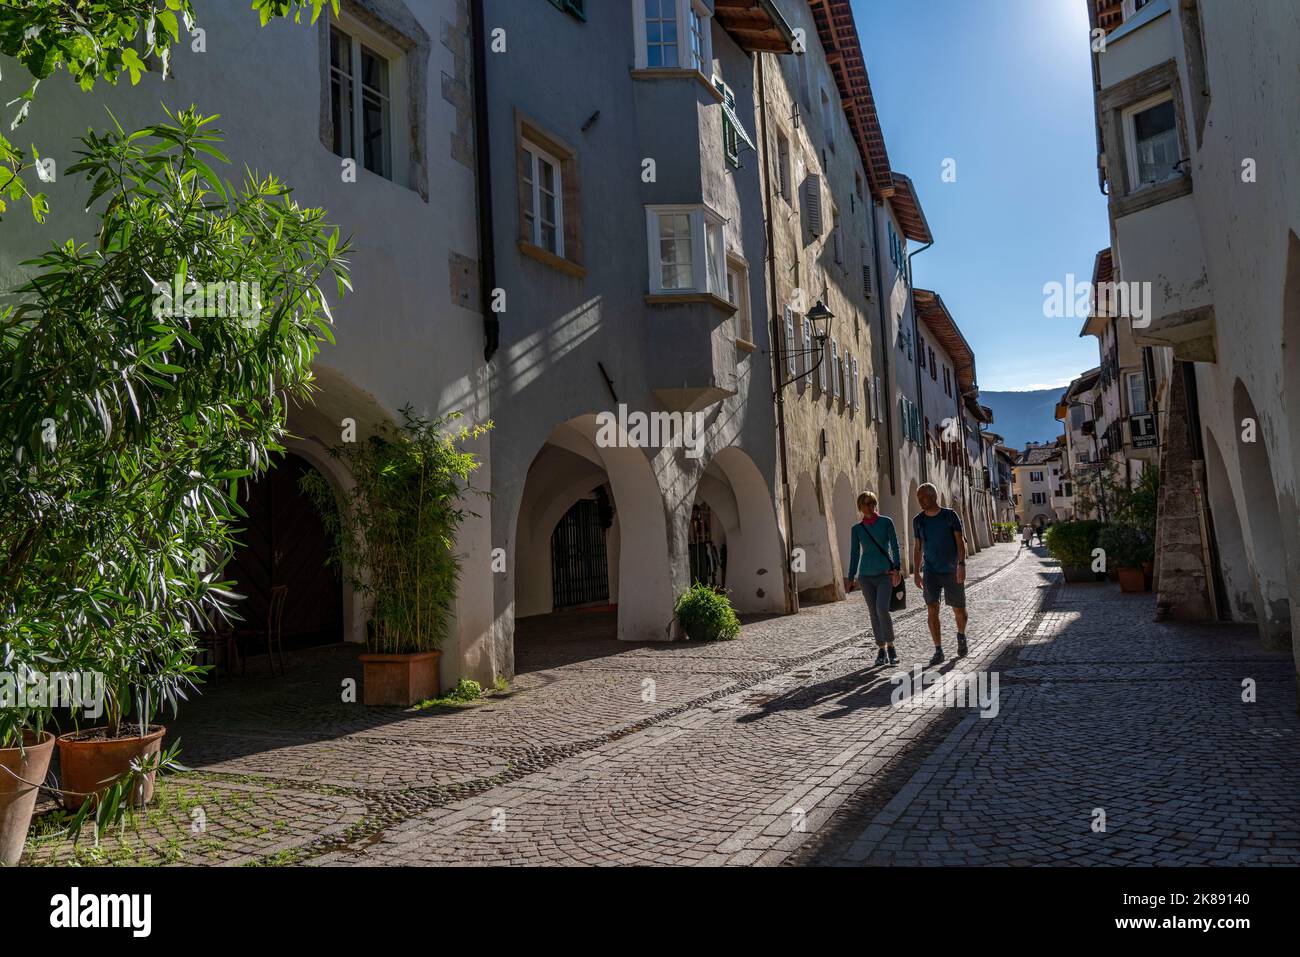 The town of Neumarkt, in the Adige Valley, in South Tyrol, arcades in the old town, in front of shops and restaurants, Italy Stock Photo